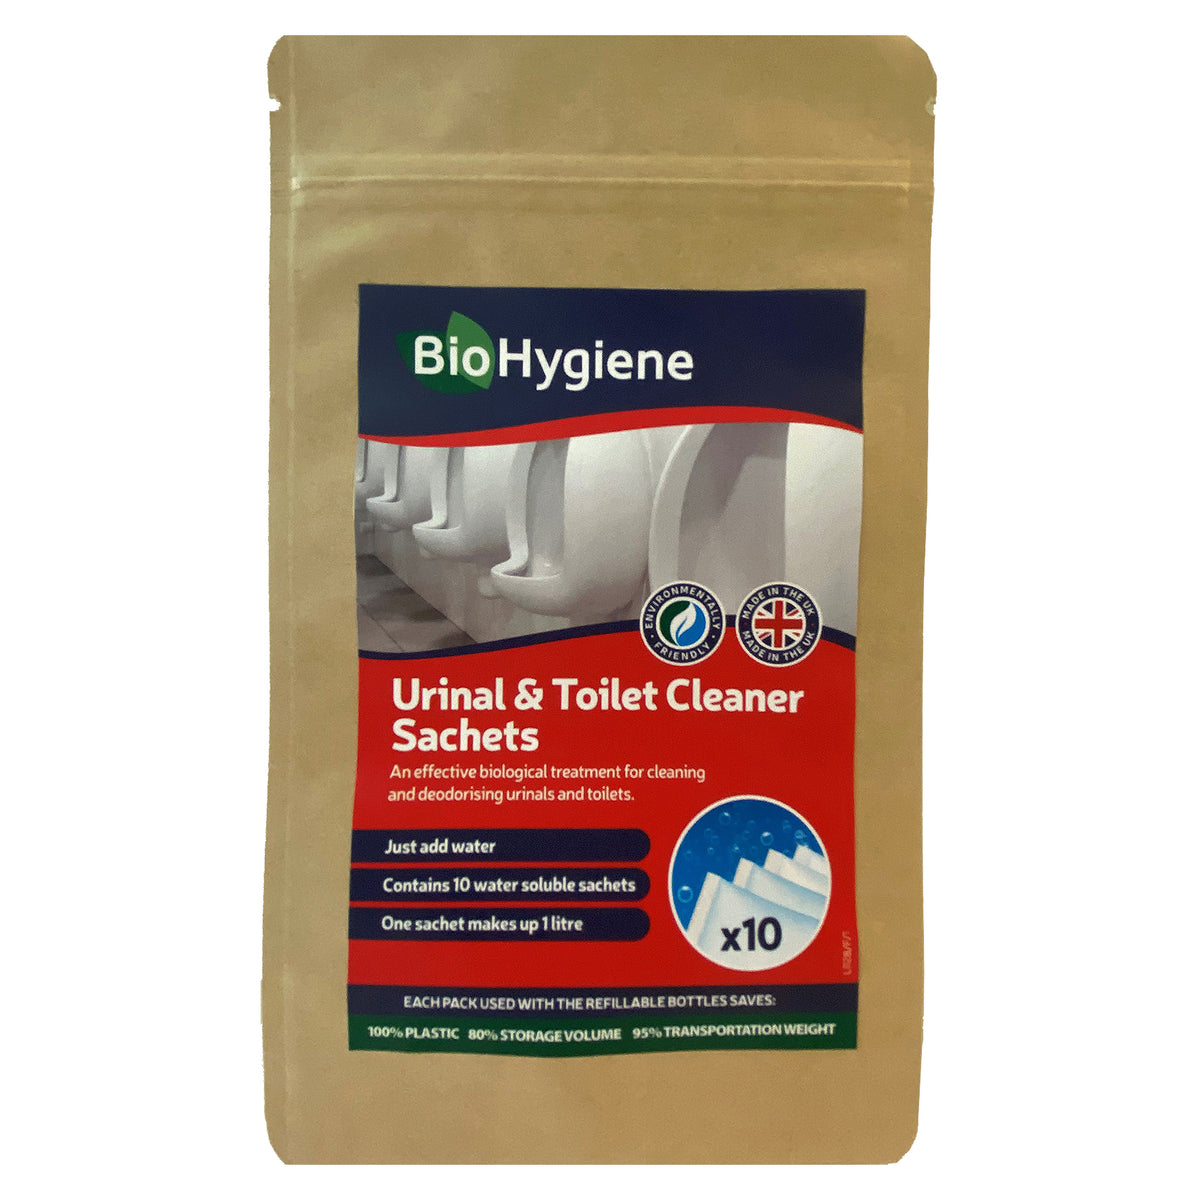 Bio-hygiene Urinal and Toilet Cleaner